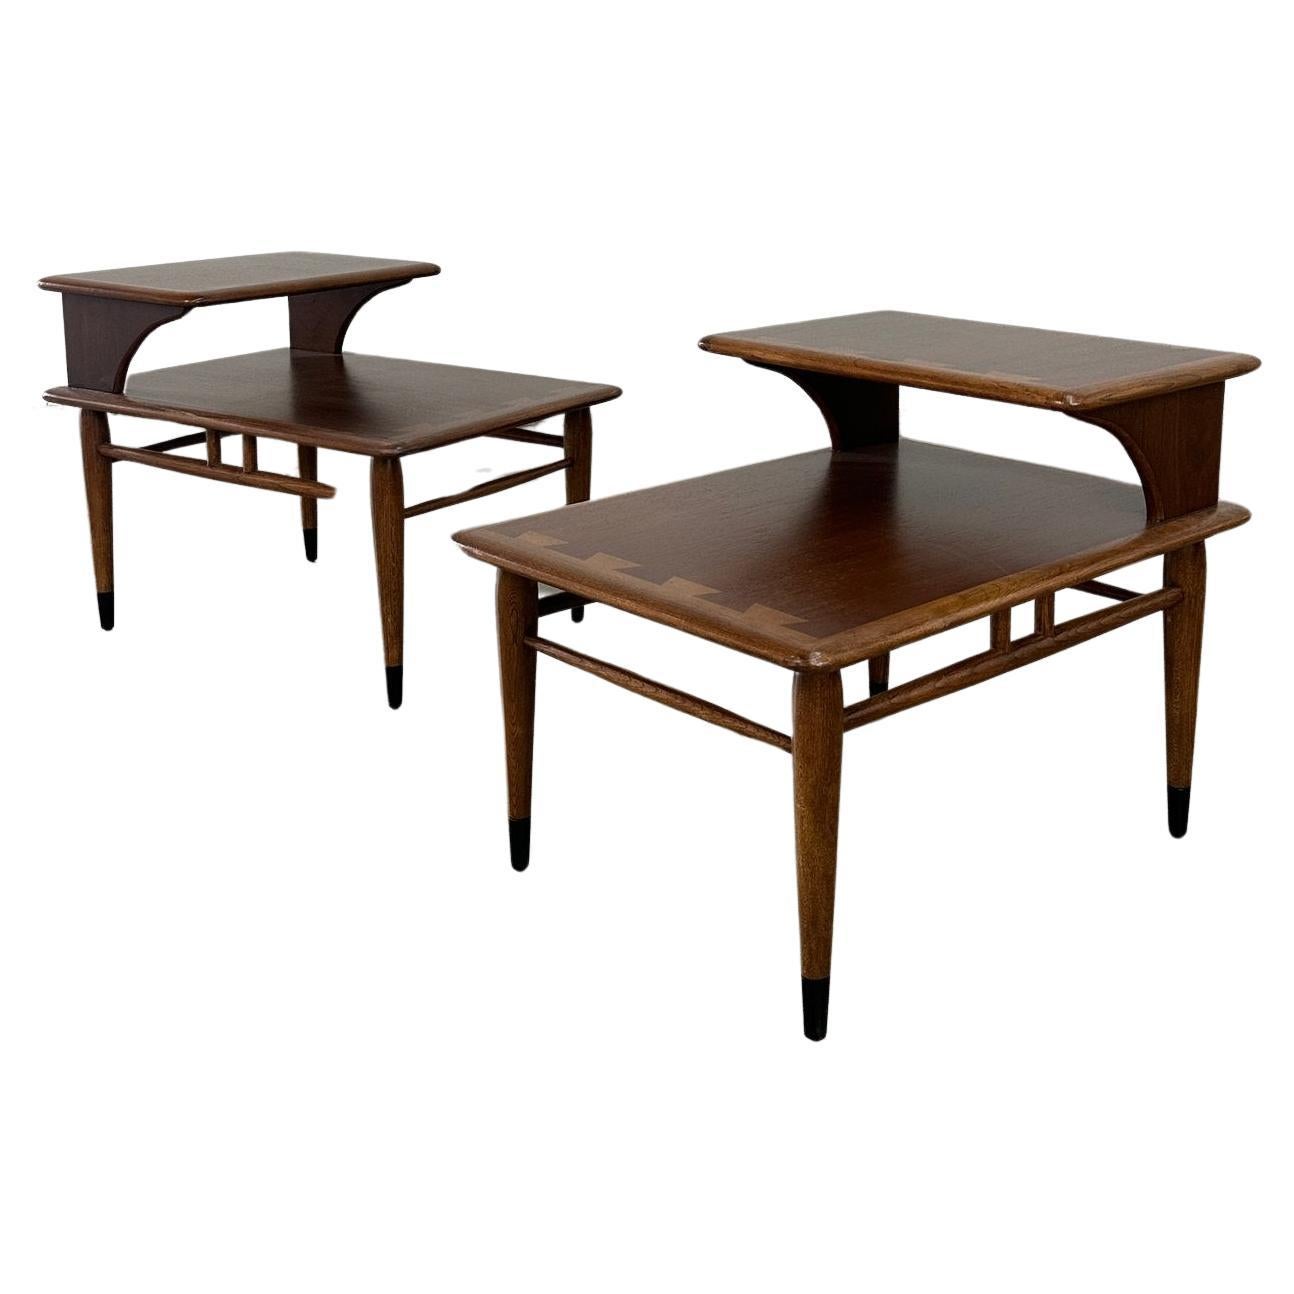 Two tier side tables by Lane Acclaim- pair For Sale